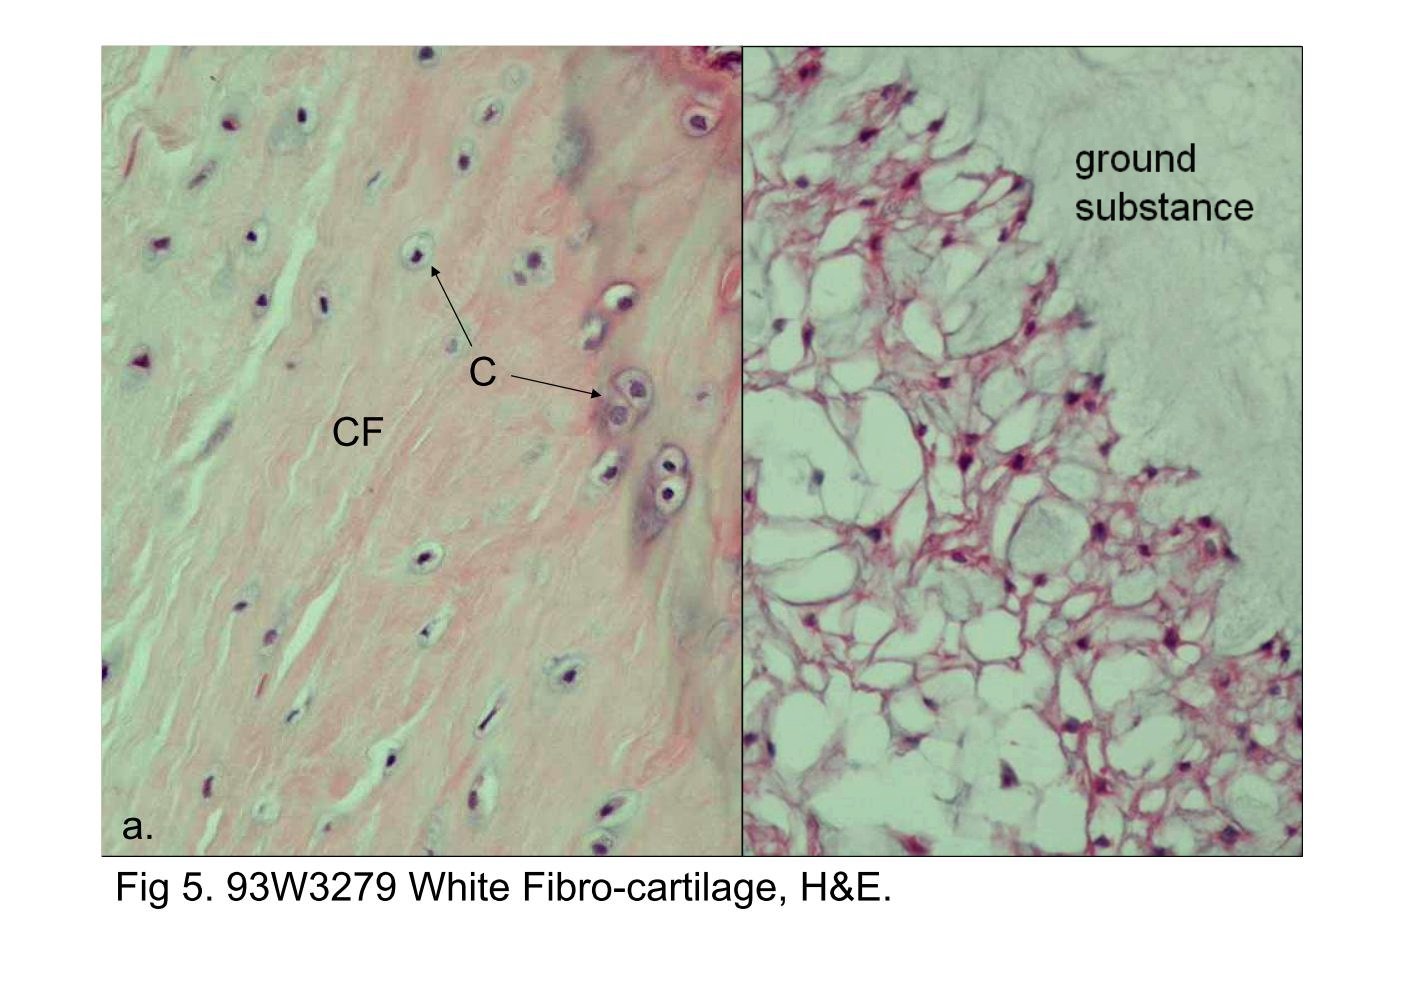 block6-1_13.jpg - Fig 5. 93W3279 White Fibro-cartilage, H&E.Fibrocartilage is a combination of dense regular connectivetissue and hyaline cartilage. The chondrocytes (C) are dispersedamong the collagen fiber bundles (CF) (Fig 5a).Fig 5b shows the histological structures in the nucleus pulposus.It is composed of ground substance and physaliphorous cells.